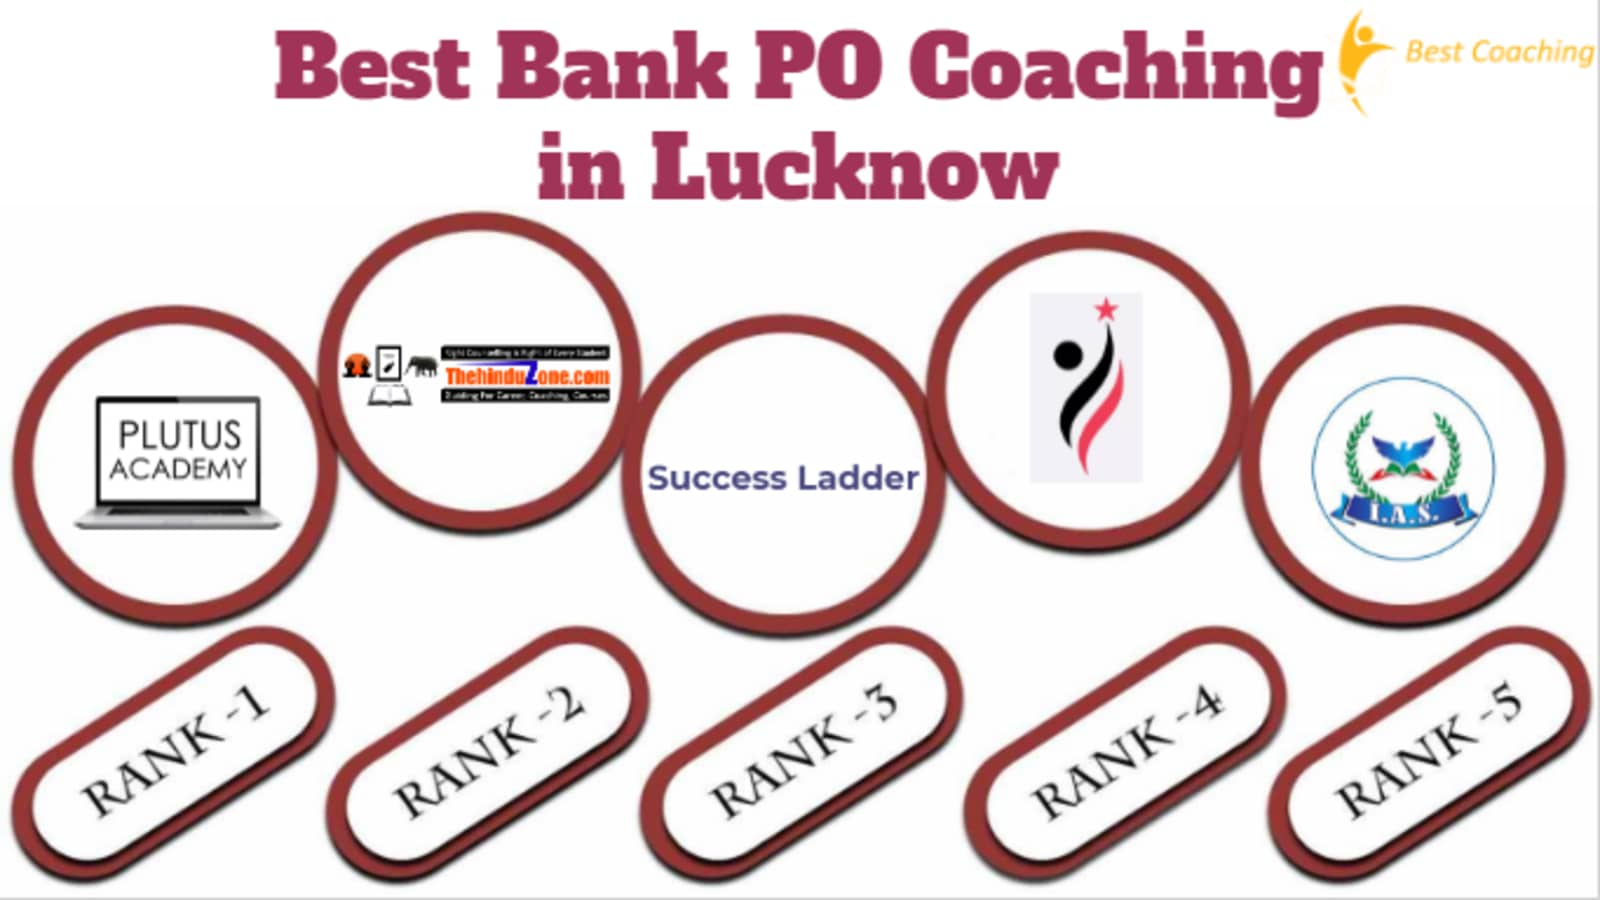 Best Bank PO Coaching in Lucknow